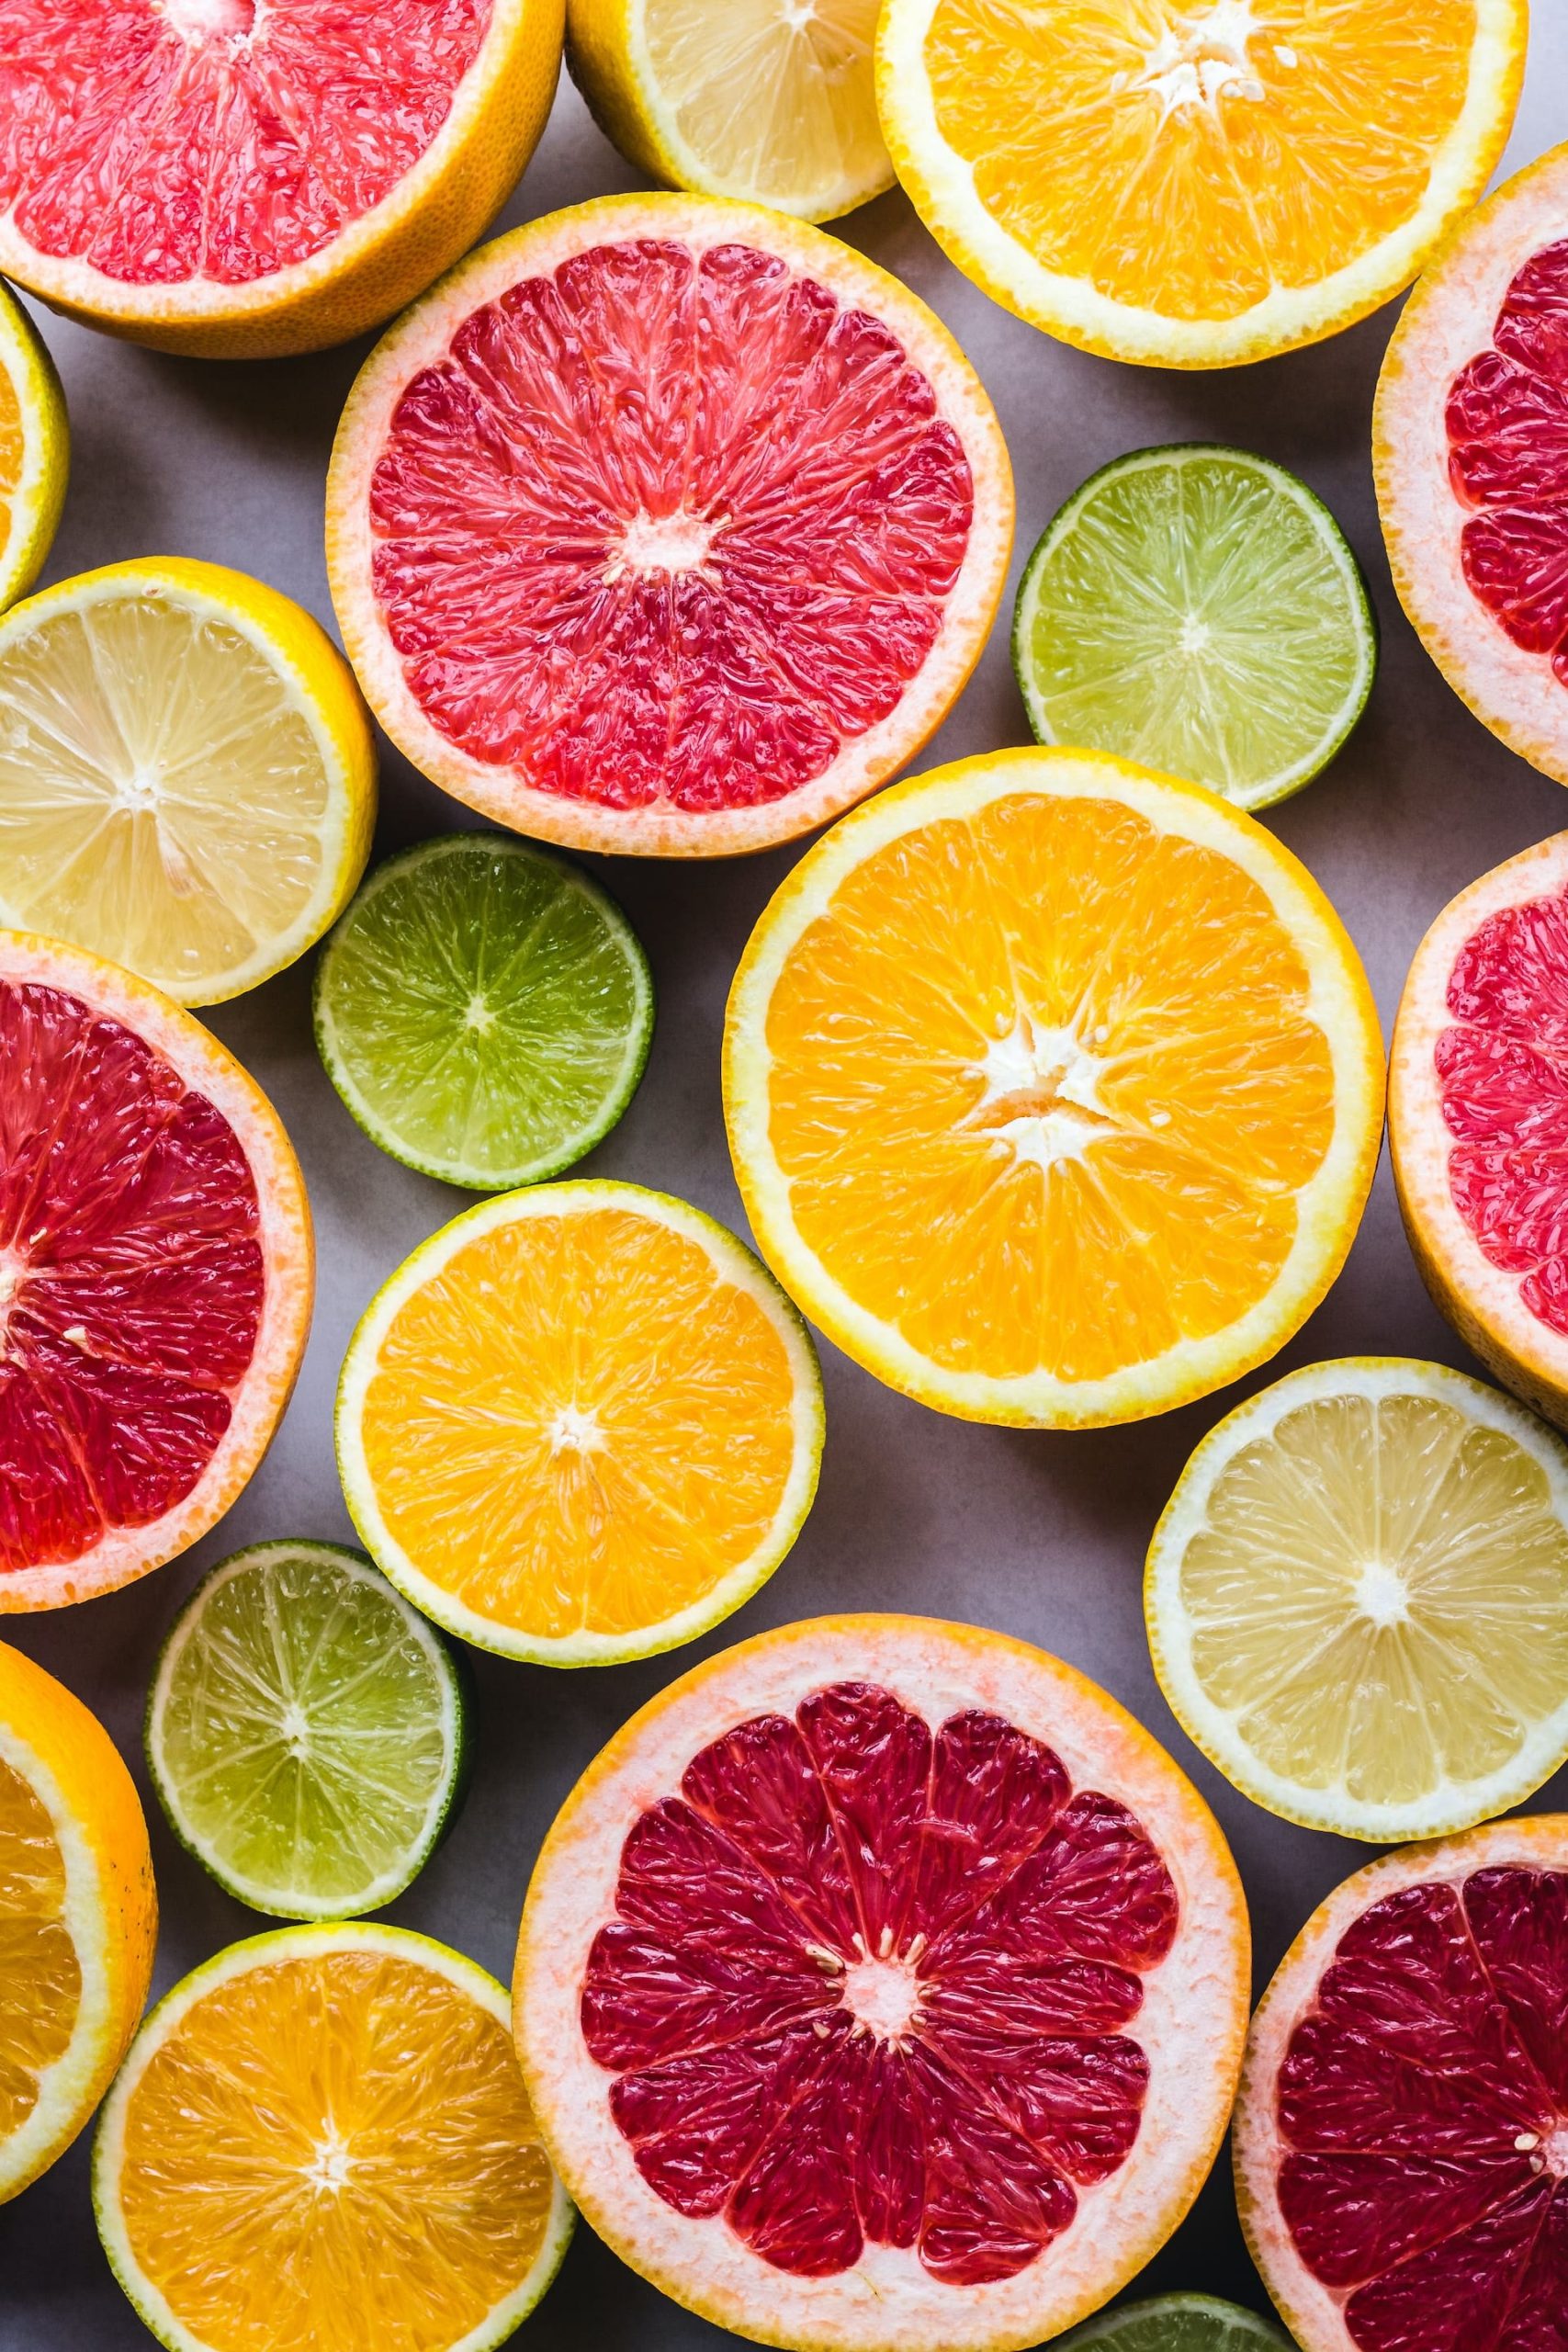 Citrus Bioflavonoids – a gift from nature